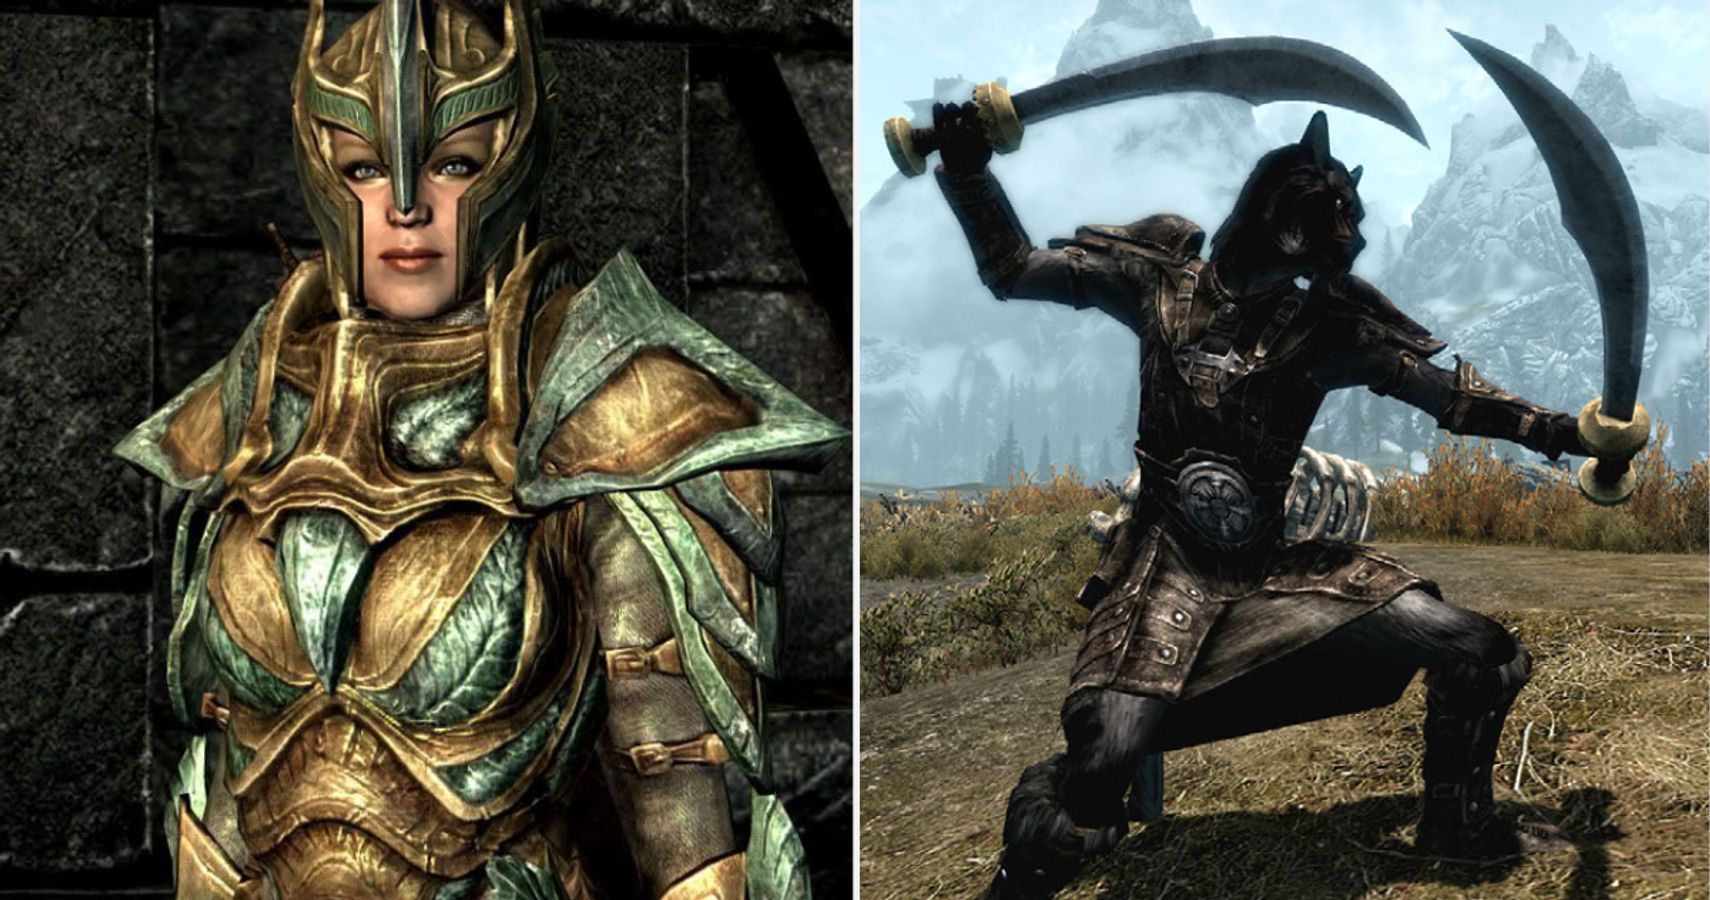 Skyrim Light Armor Character And Dual Wielding